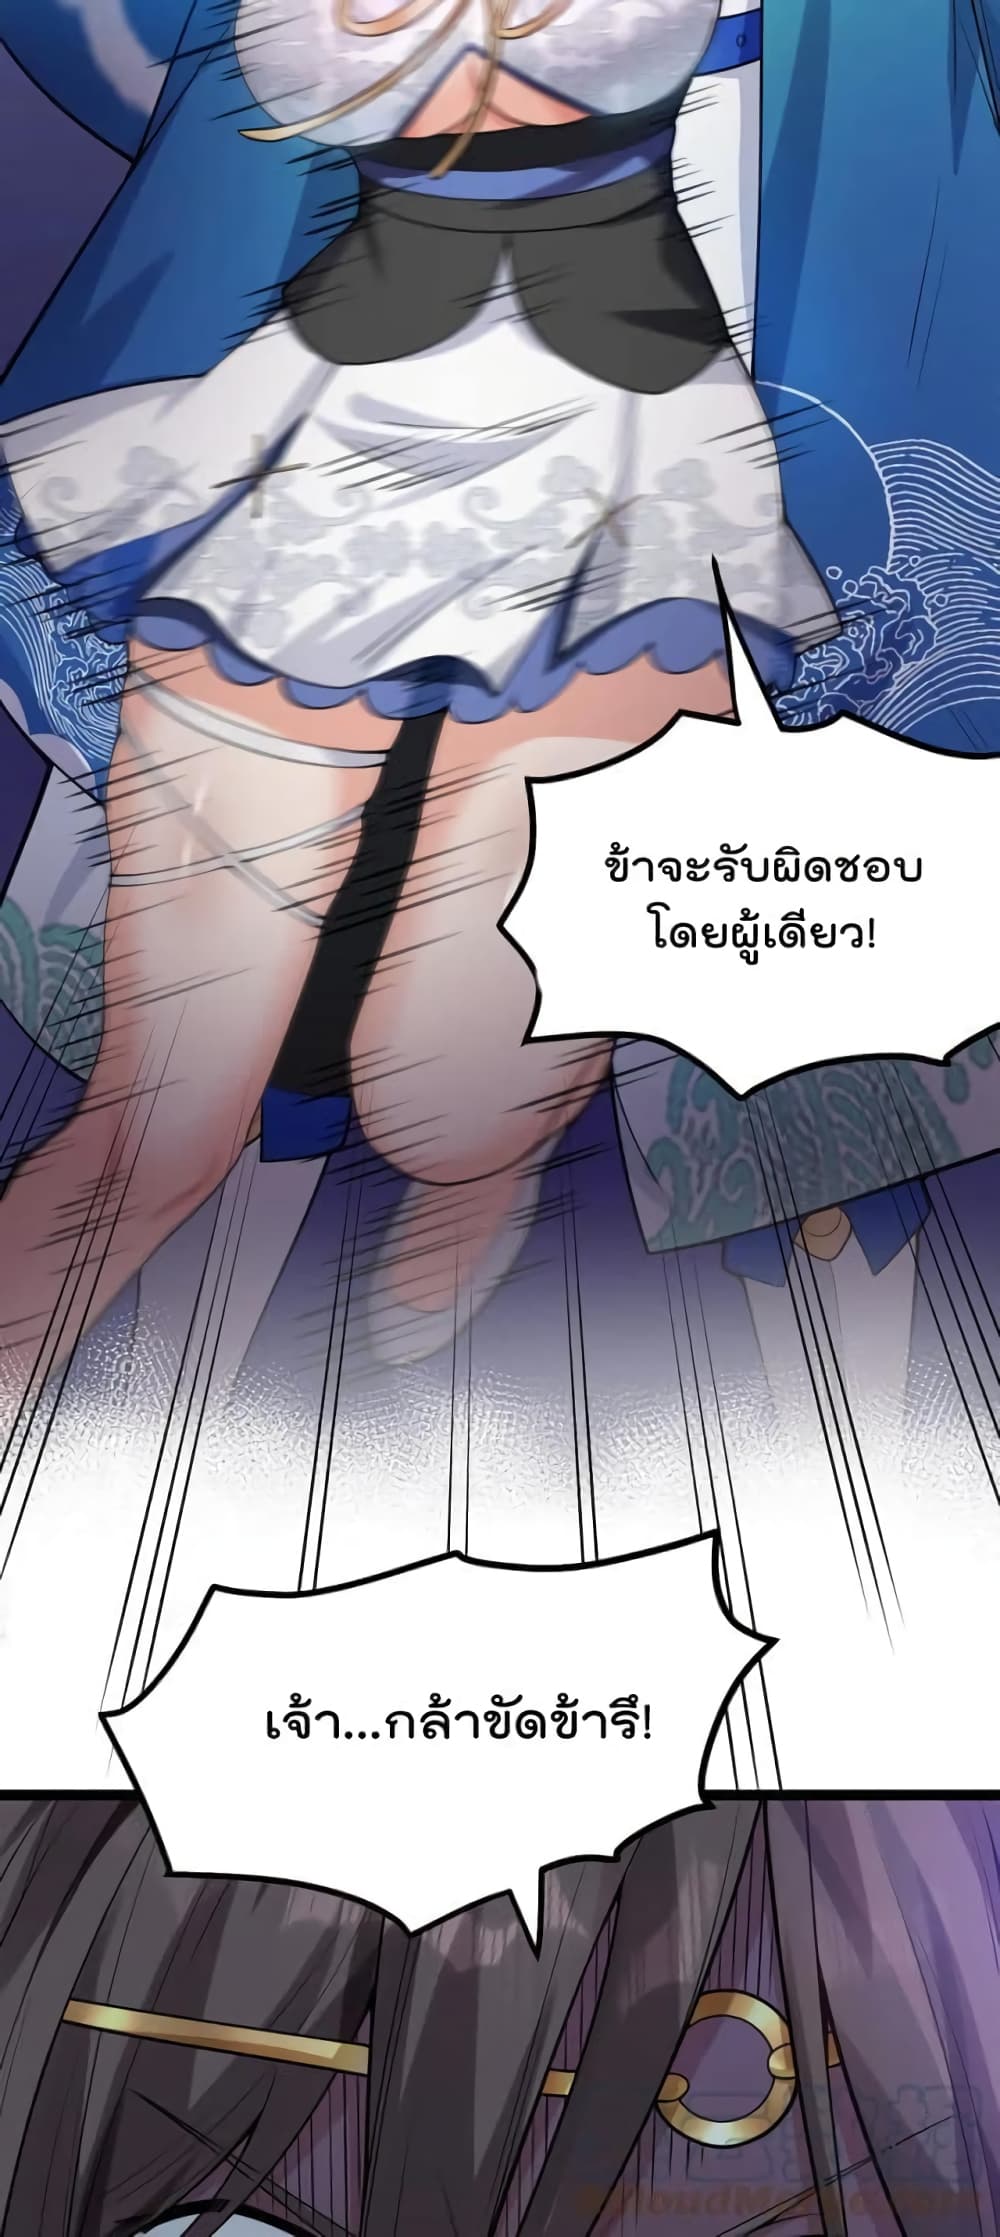 Godsian Masian from Another World ตอนที่ 114 (27)